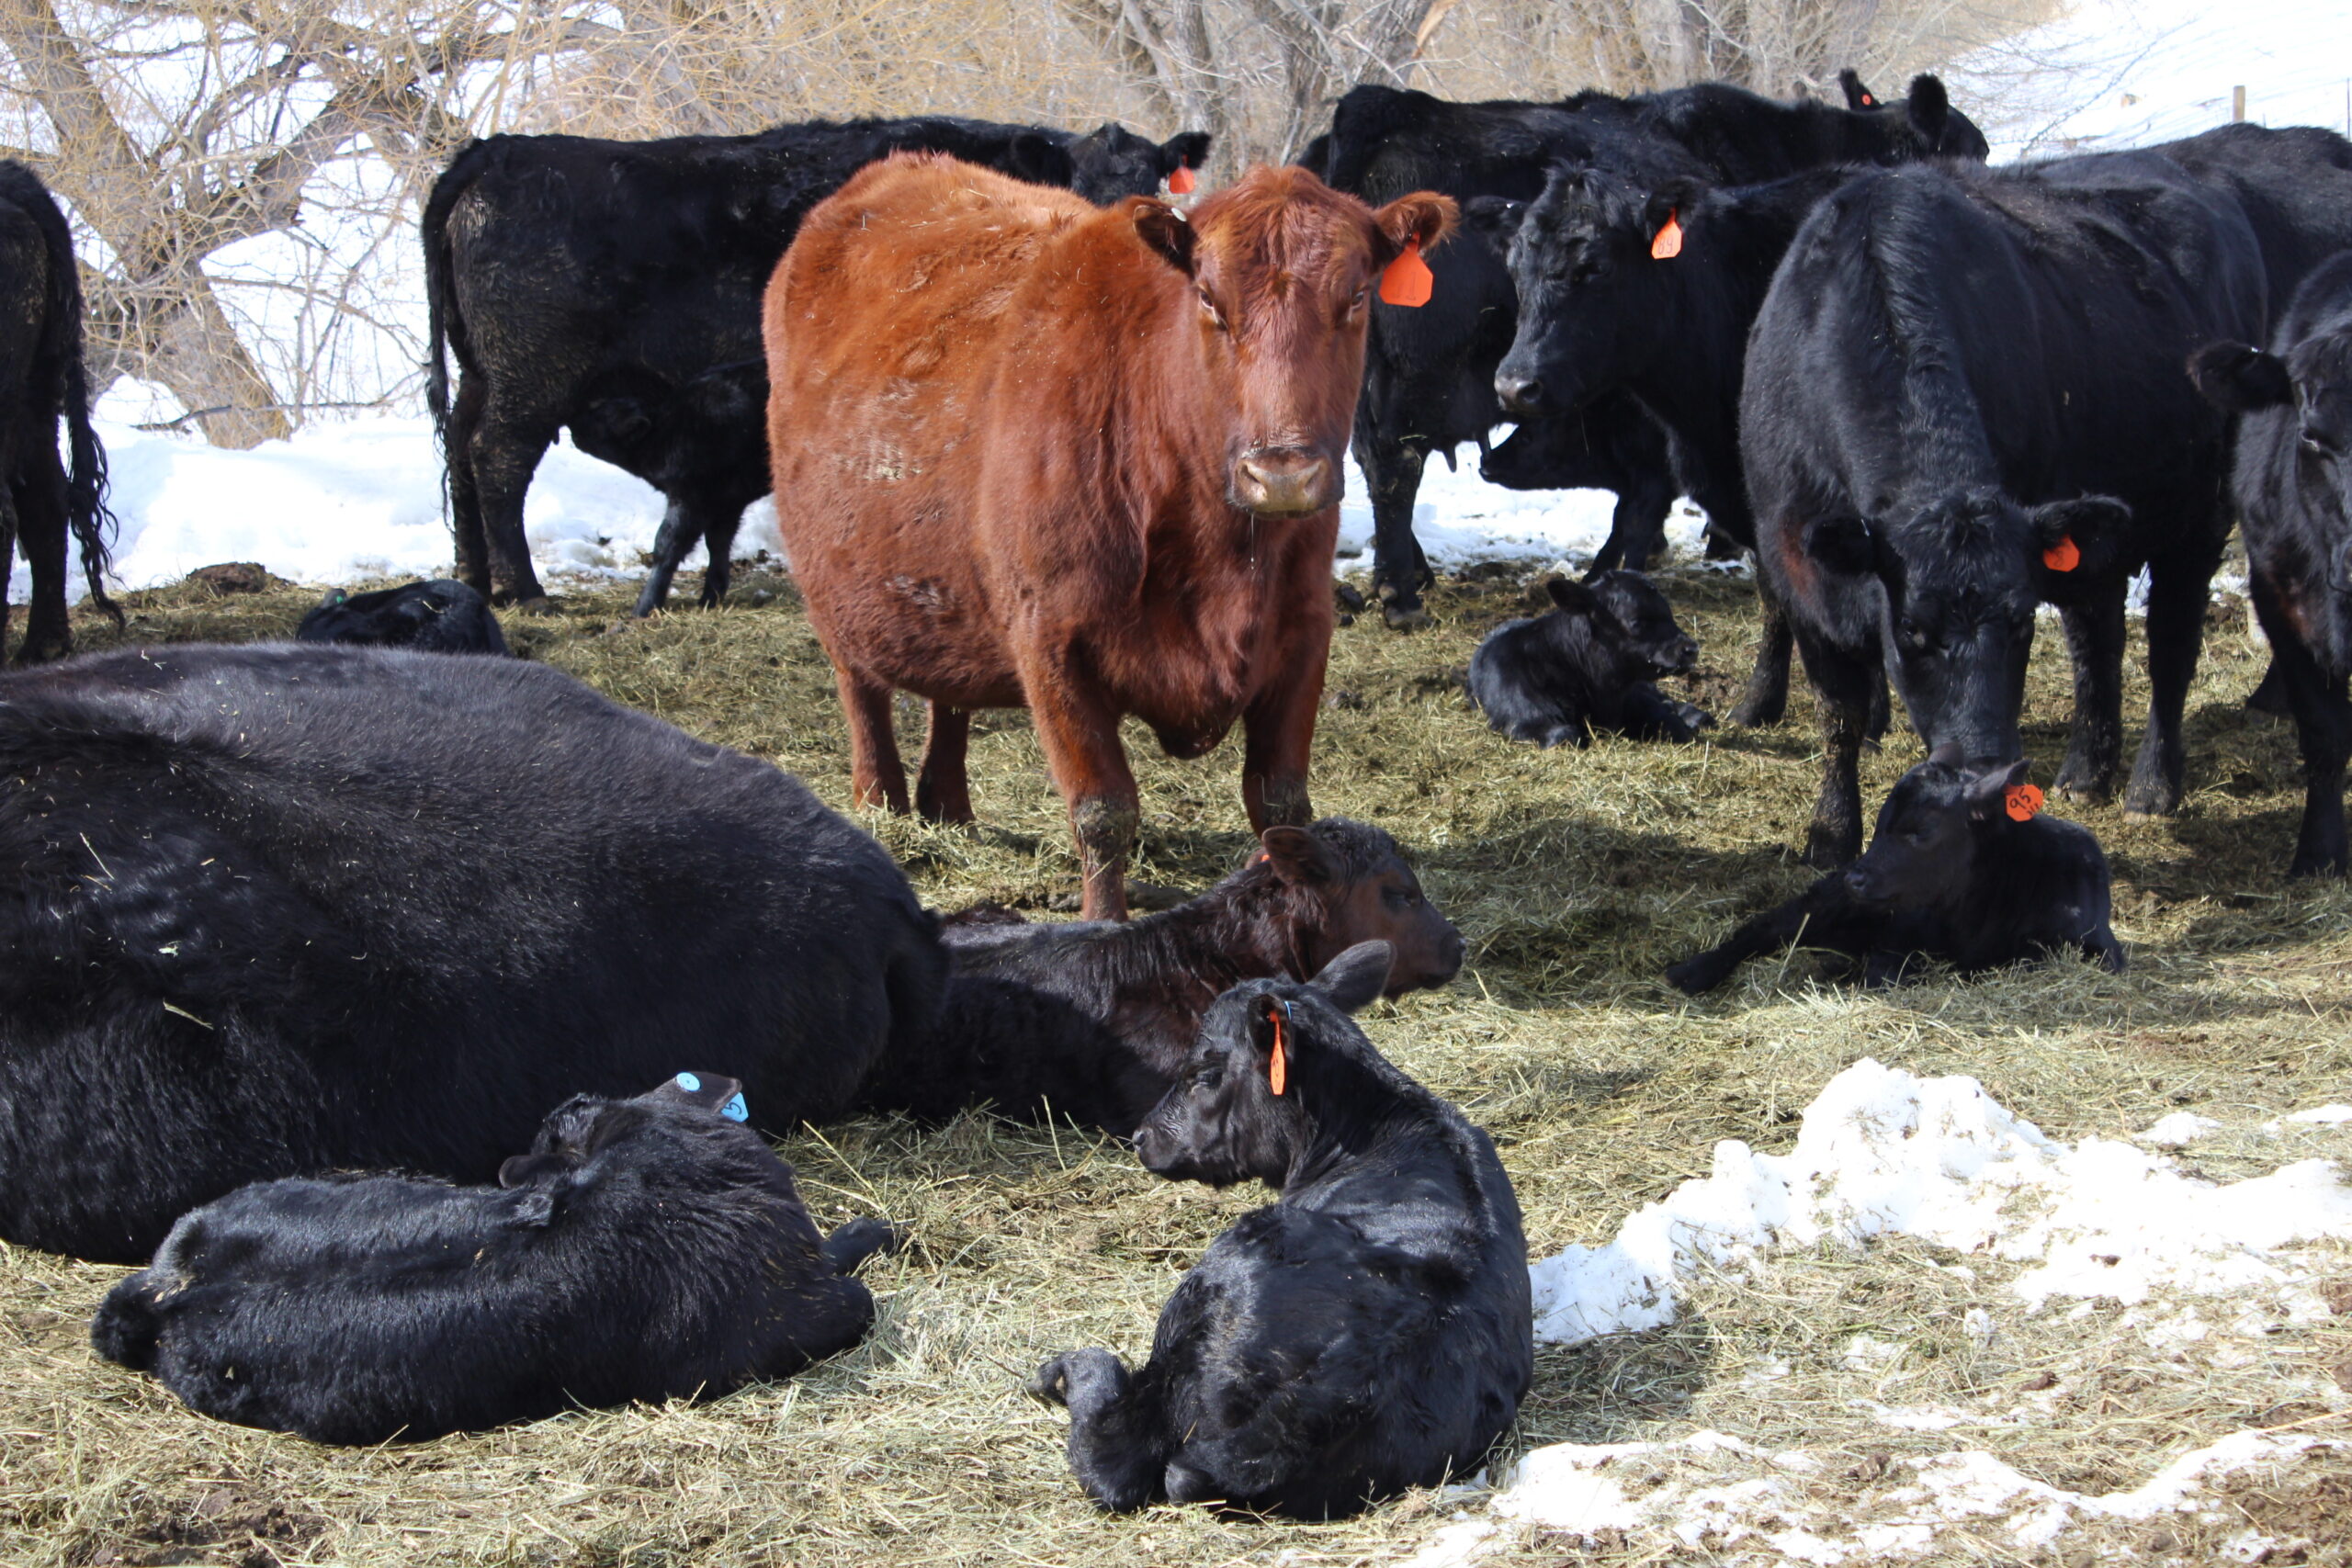 beef cows are protected as they give birth during winter